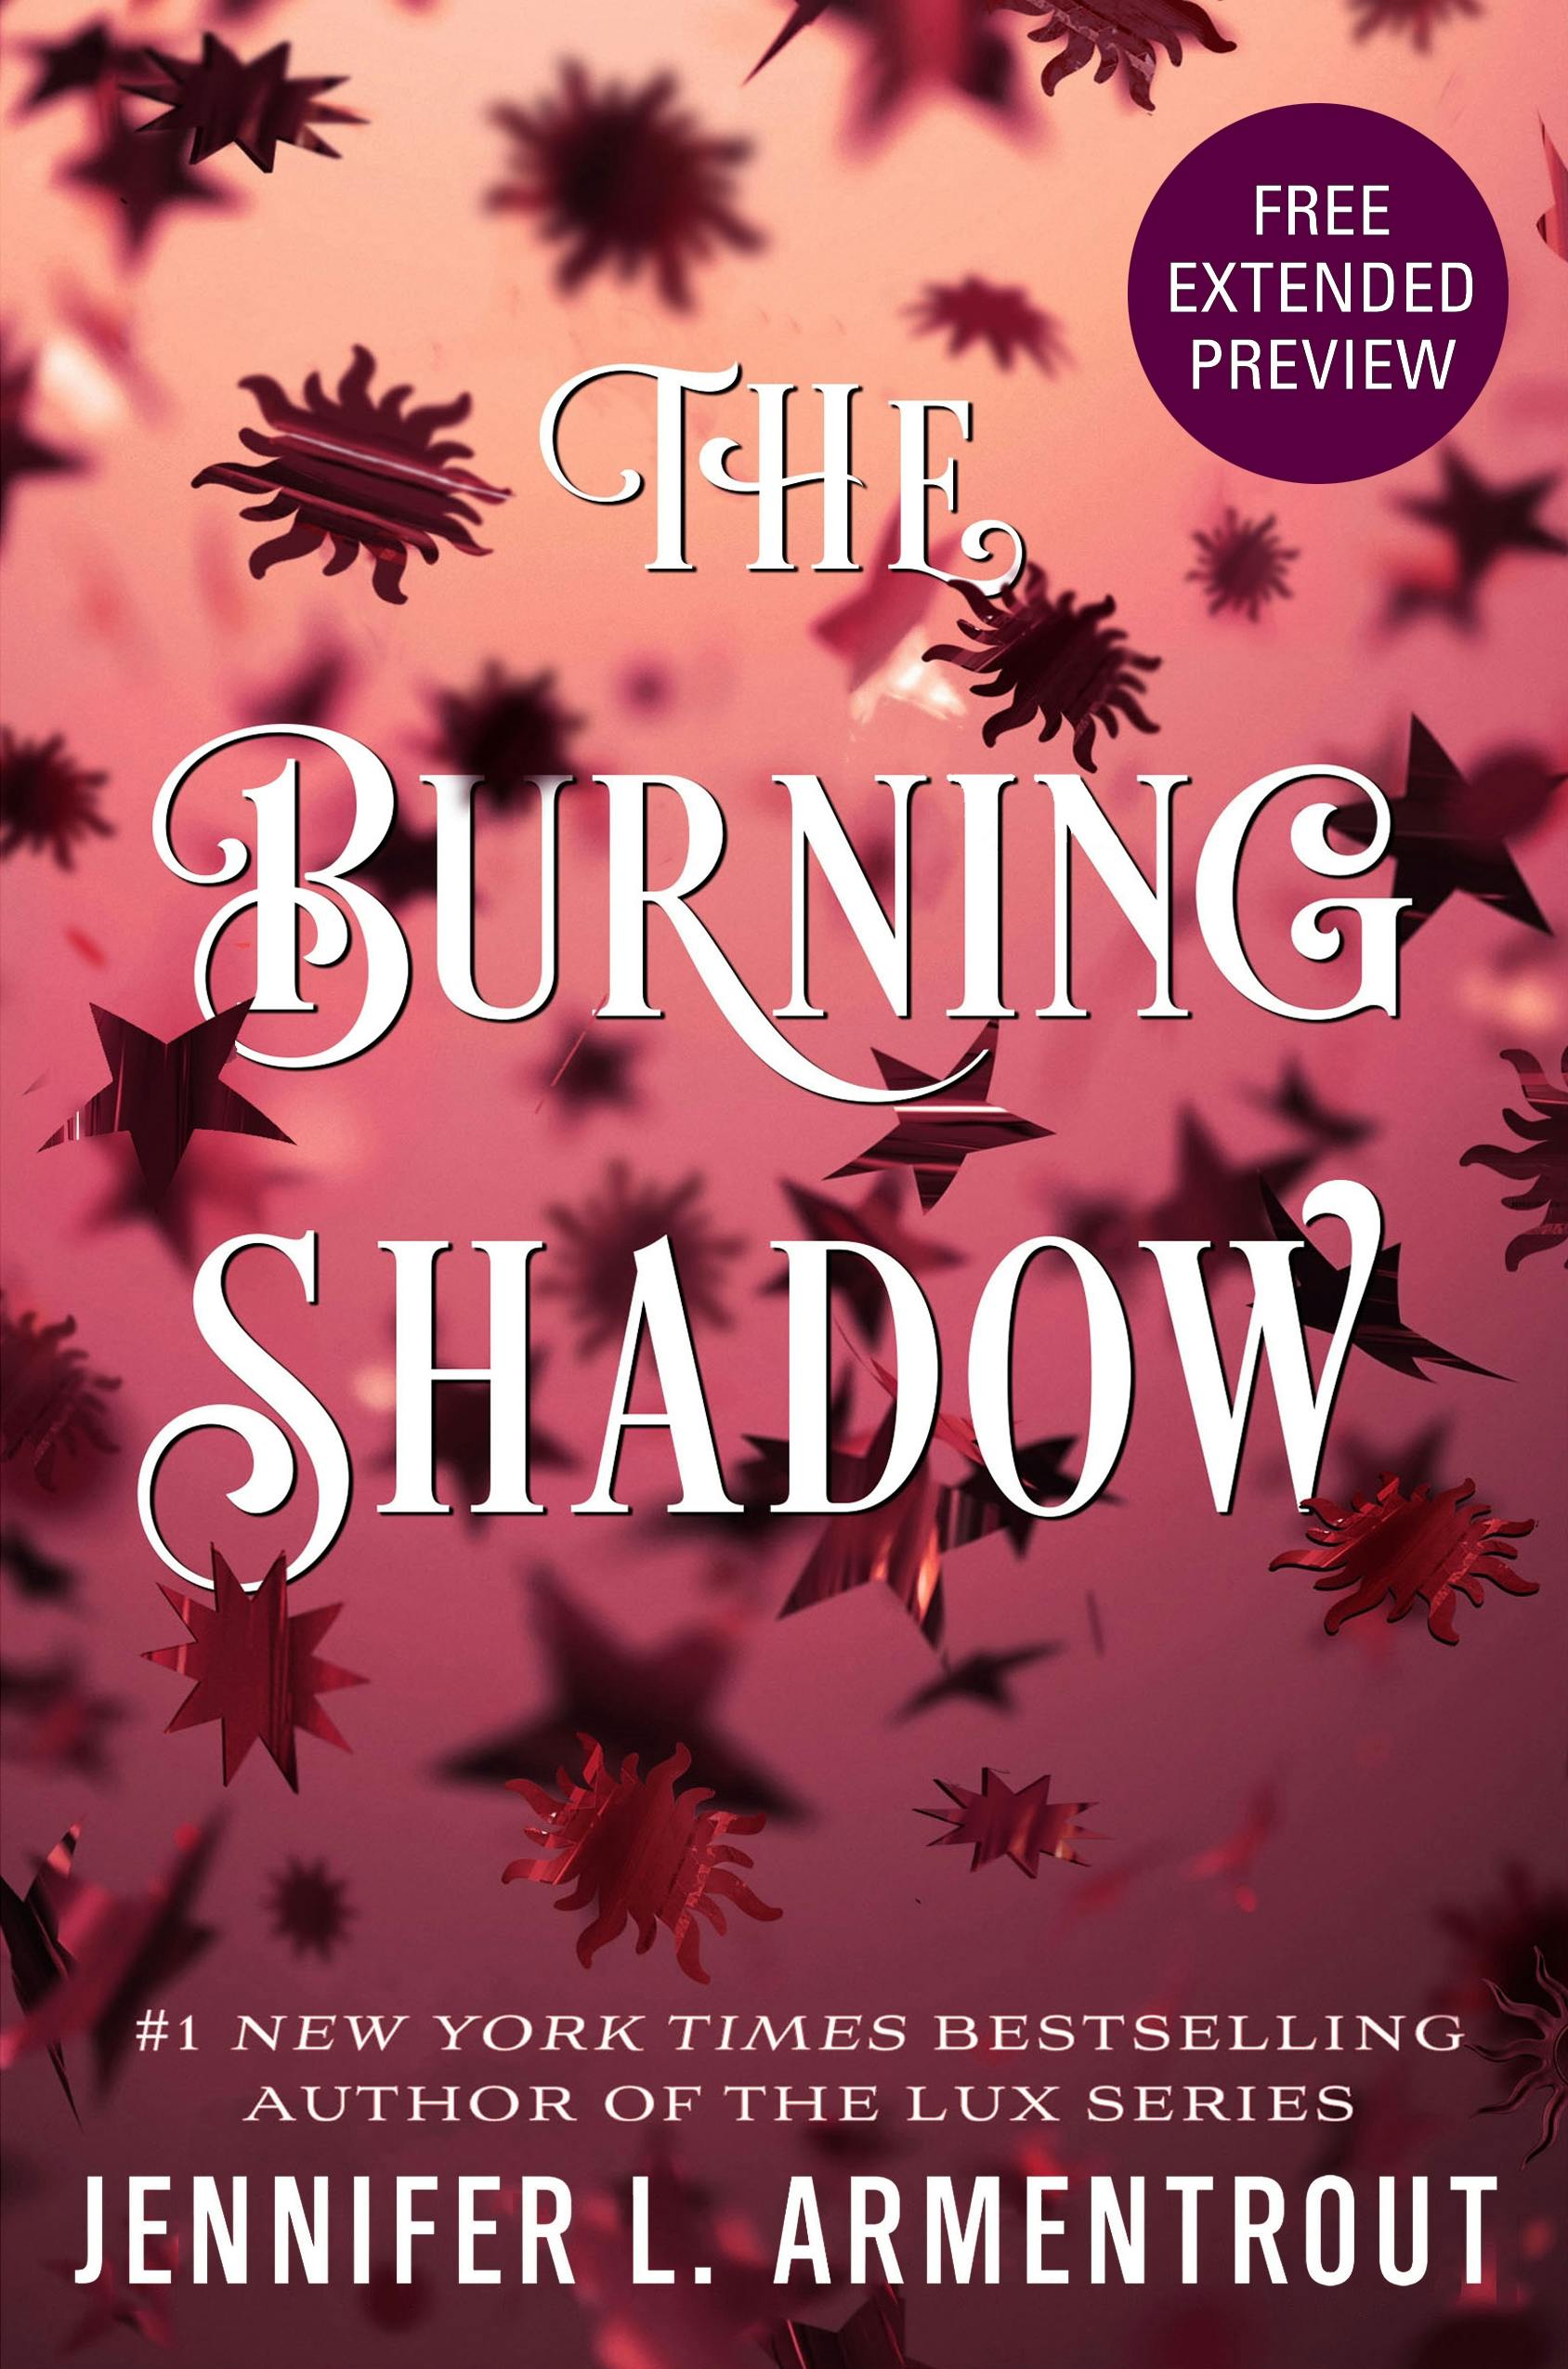 Cover for the book titled as: The Burning Shadow Sneak Peek